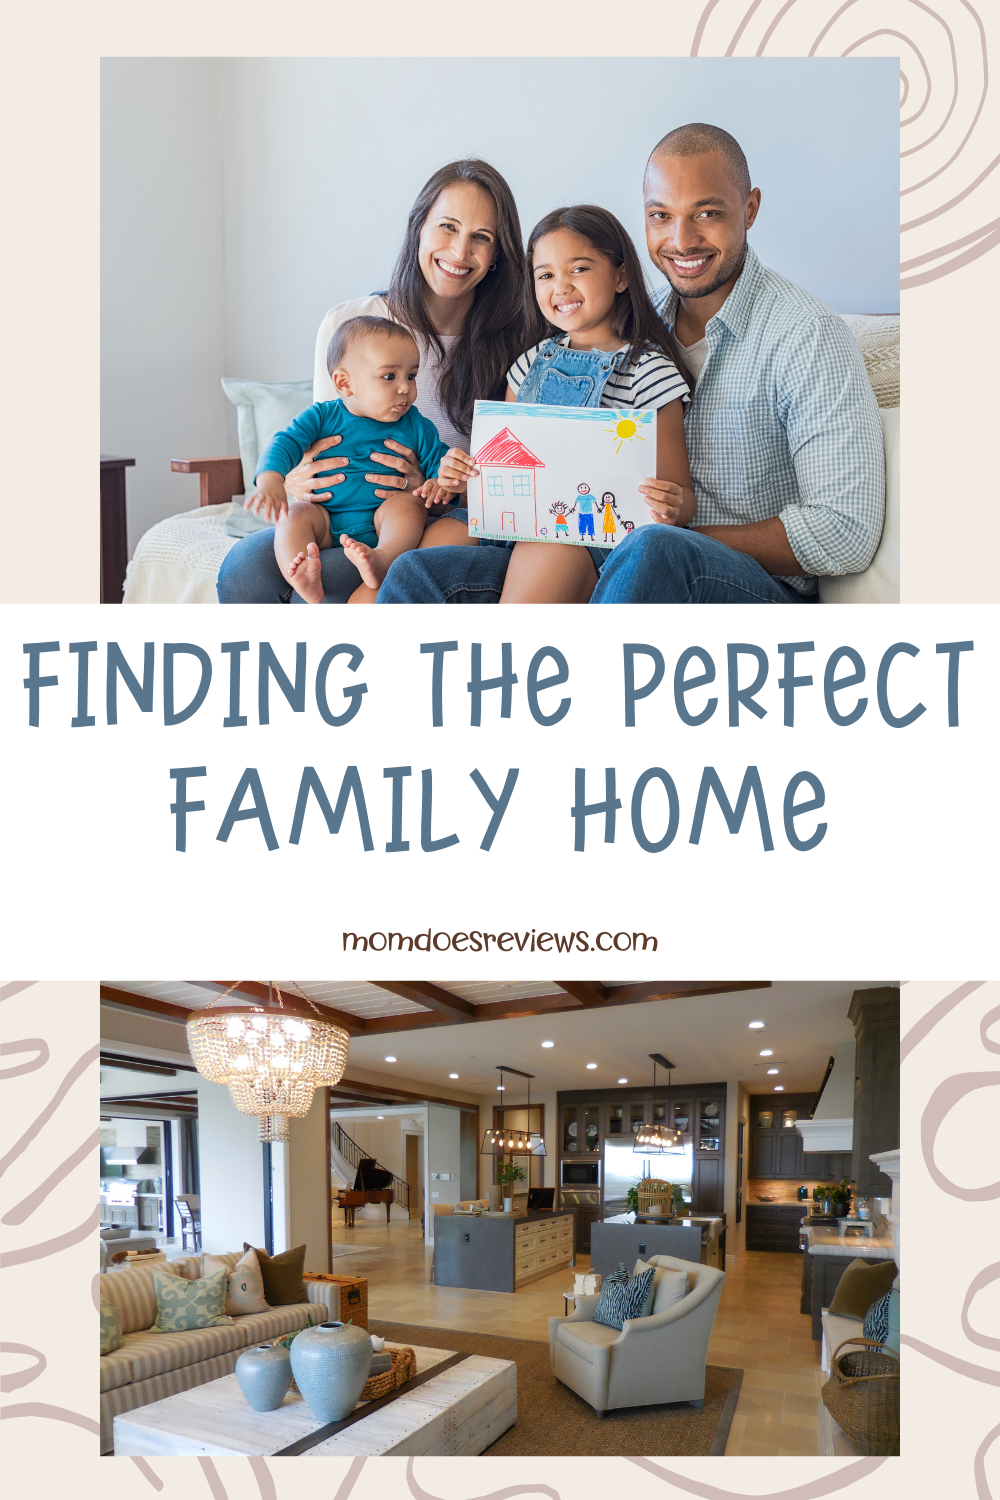 Settling Down? 5 Ways to Find the Perfect Family Home